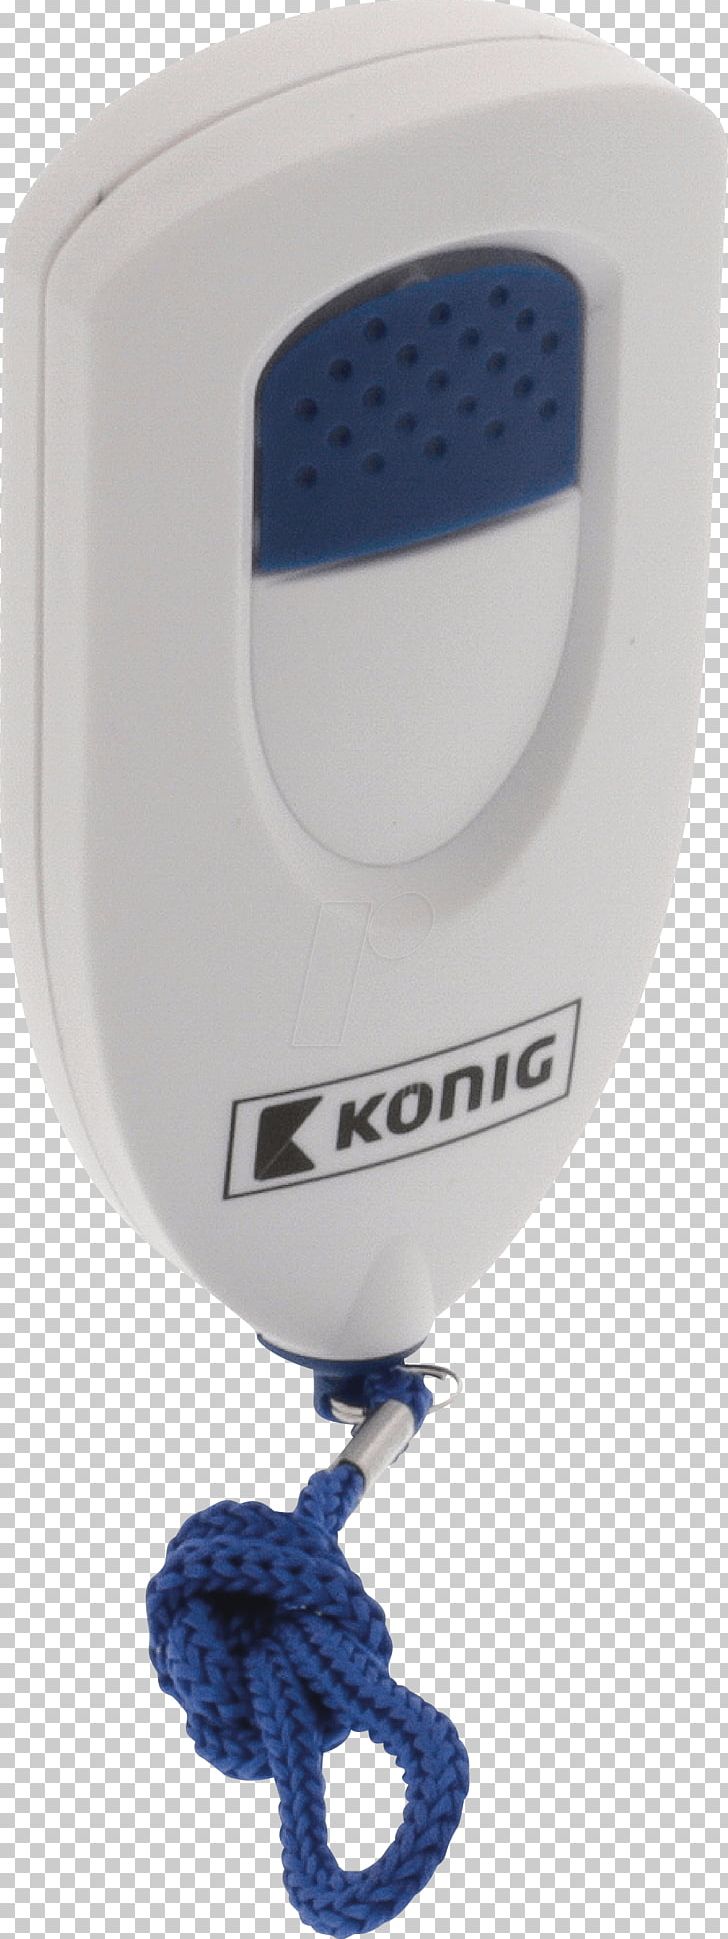 Security Alarms & Systems Alarm Device Siren King Industrial Design PNG, Clipart, Alarm, Alarm Device, Aps, Computer Hardware, Deutsche Bahn Free PNG Download